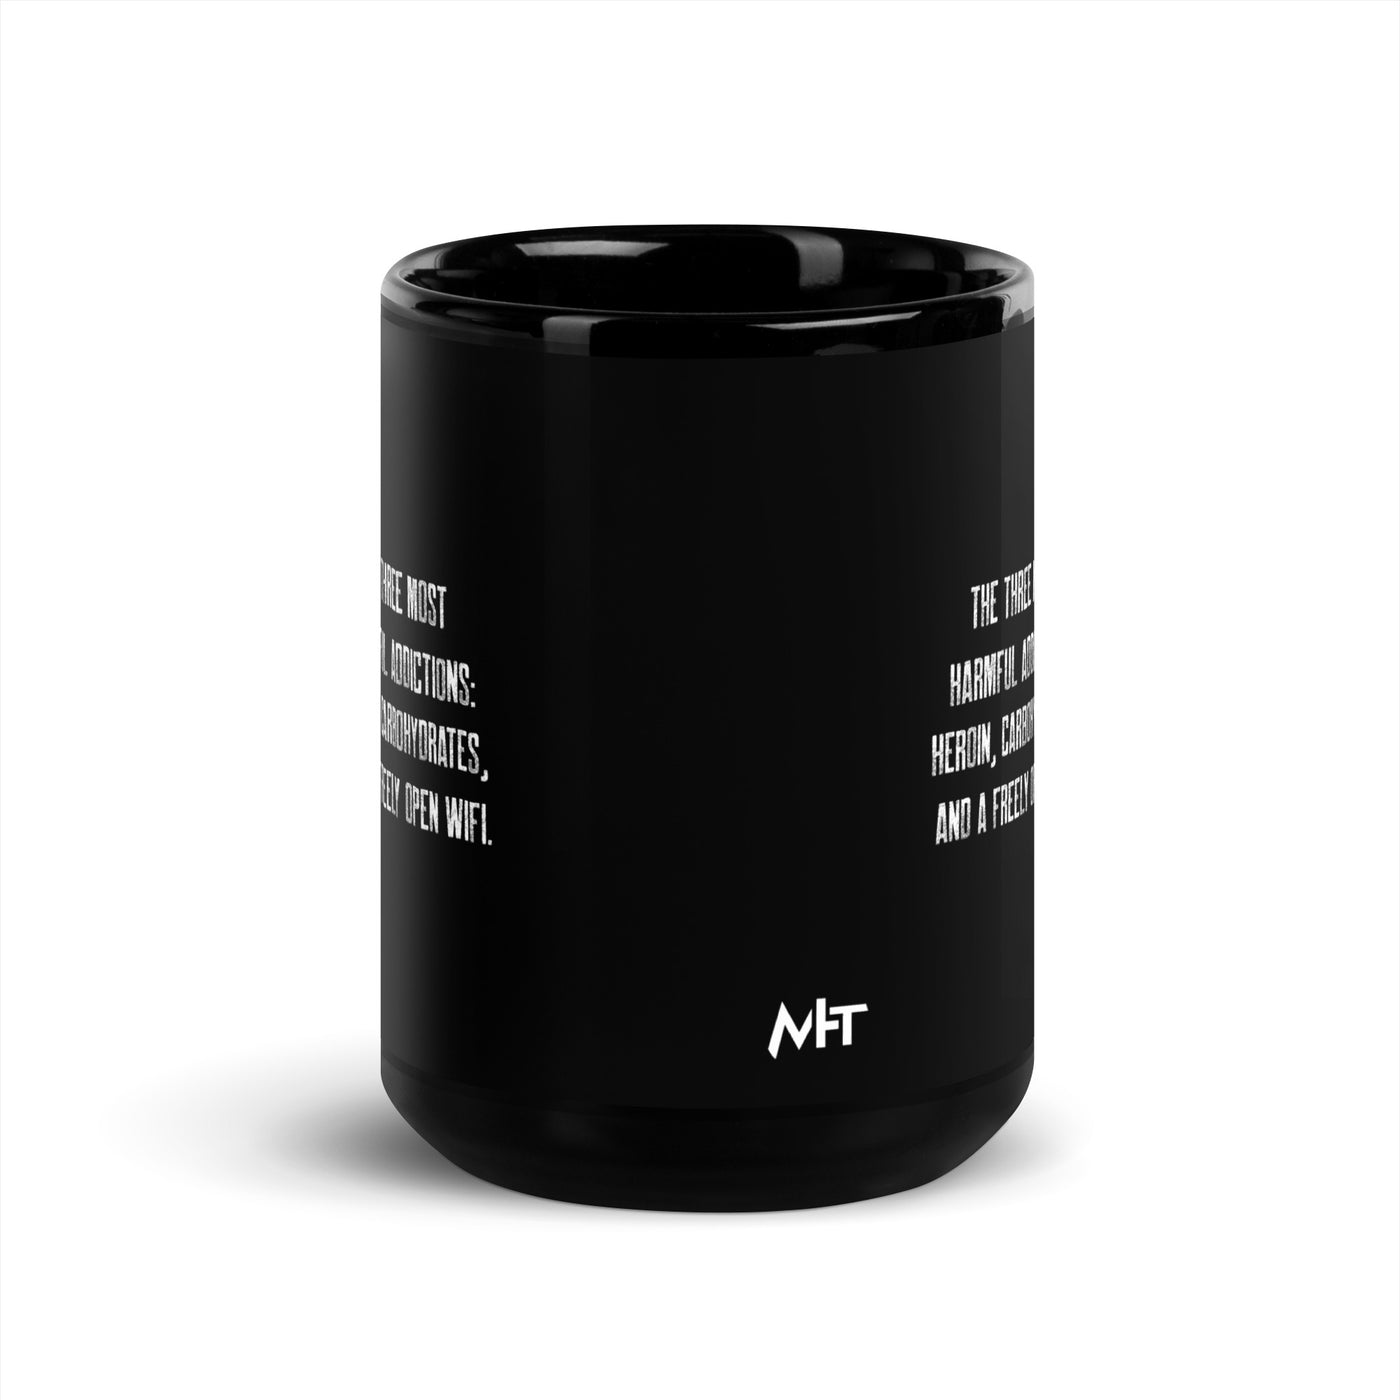 The three most harmful addictions heroin, carbohydrates and a freely open WiFi - Black Glossy Mug